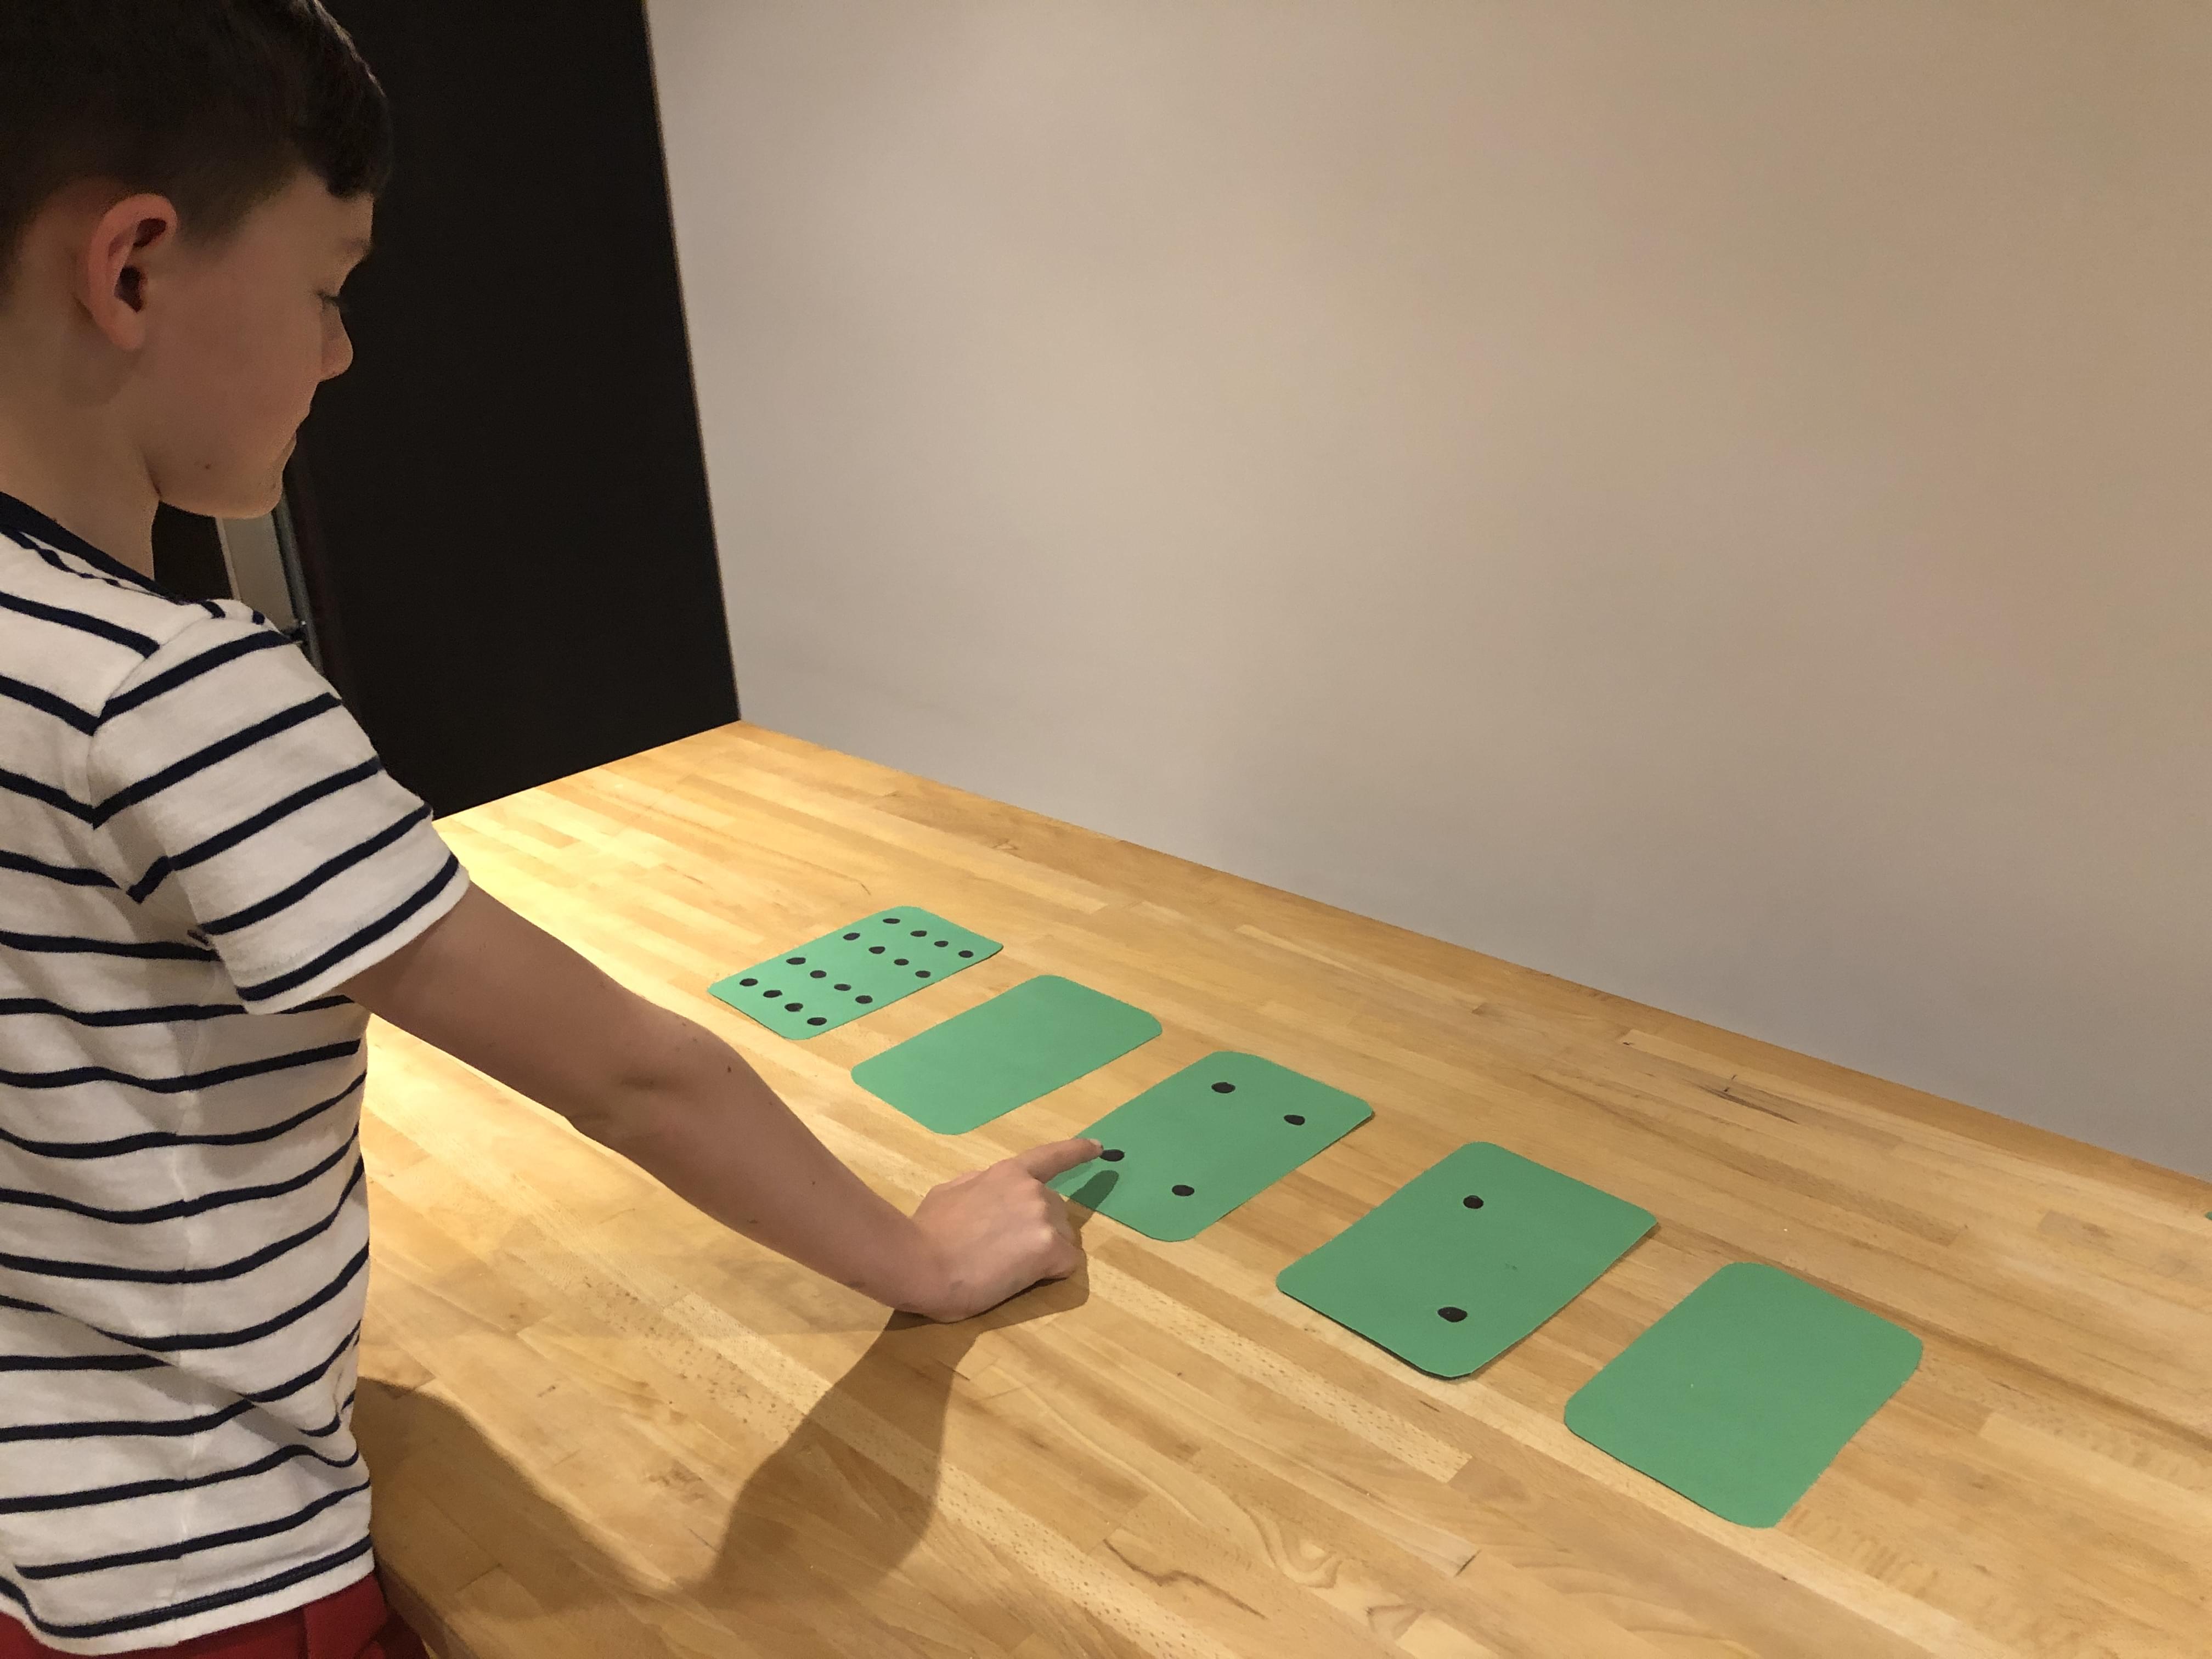 Child counting up the number of dots.